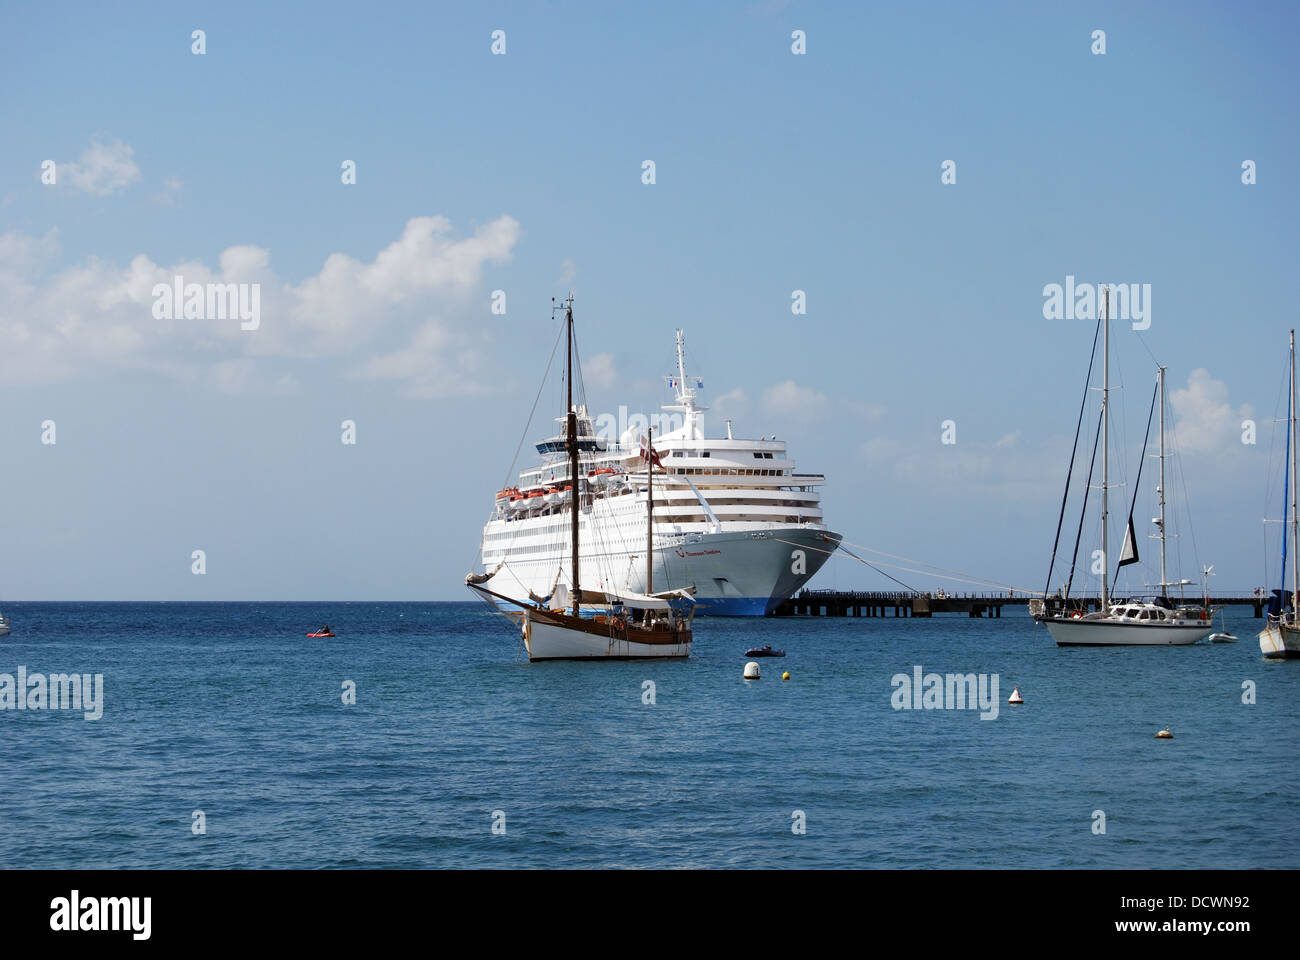 Cruise liner 'Thomson Destiny' alonside quay, with two yachts in foreground, Fort-de-France, Martinique, Caribbean. Stock Photo